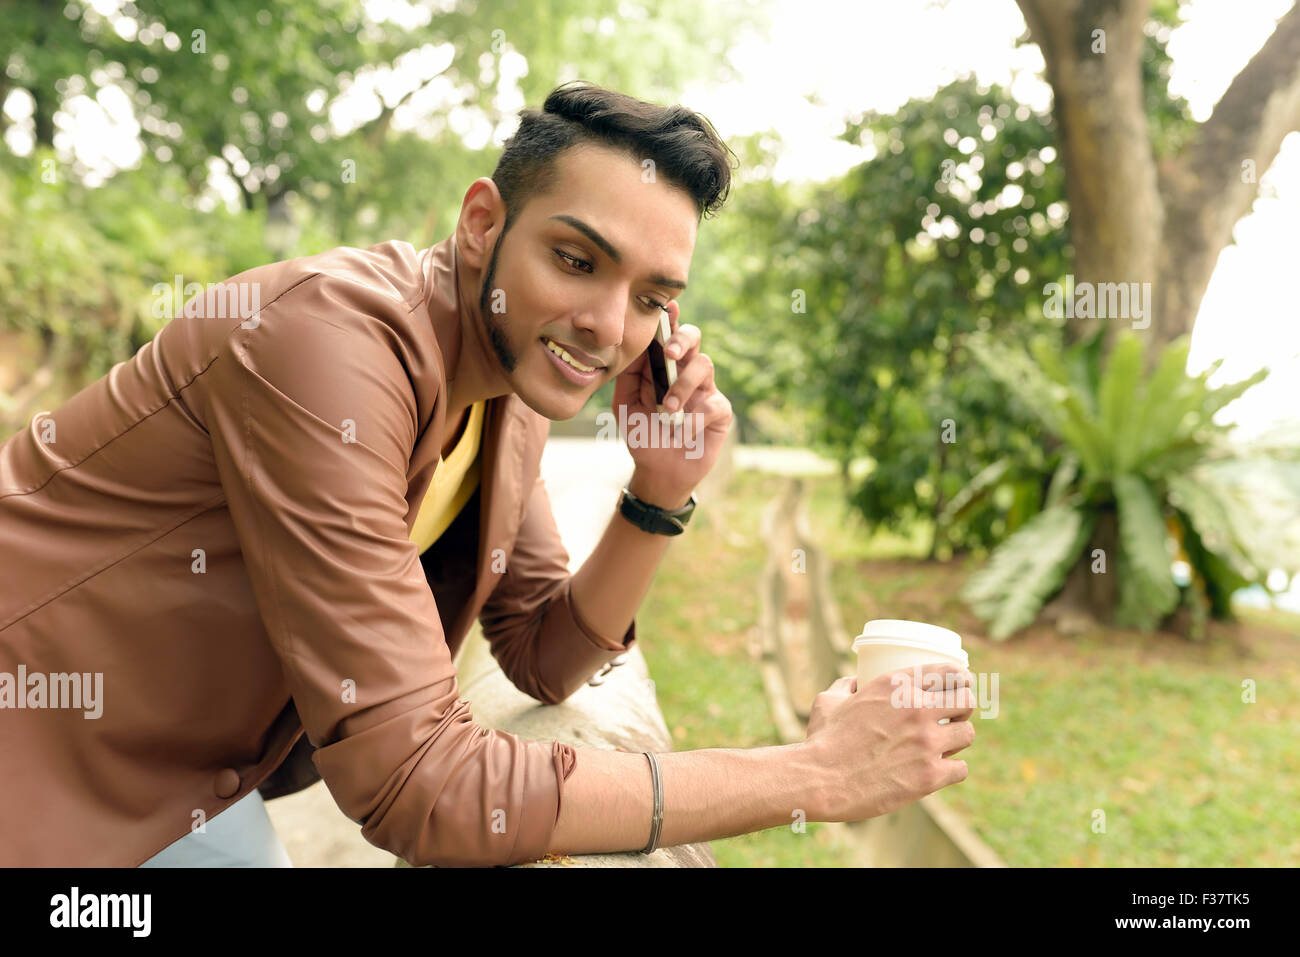 Asian , Man , Indian Ethnicities , Smart Phone , Casual Clothing , Outdoor . Stock Photo